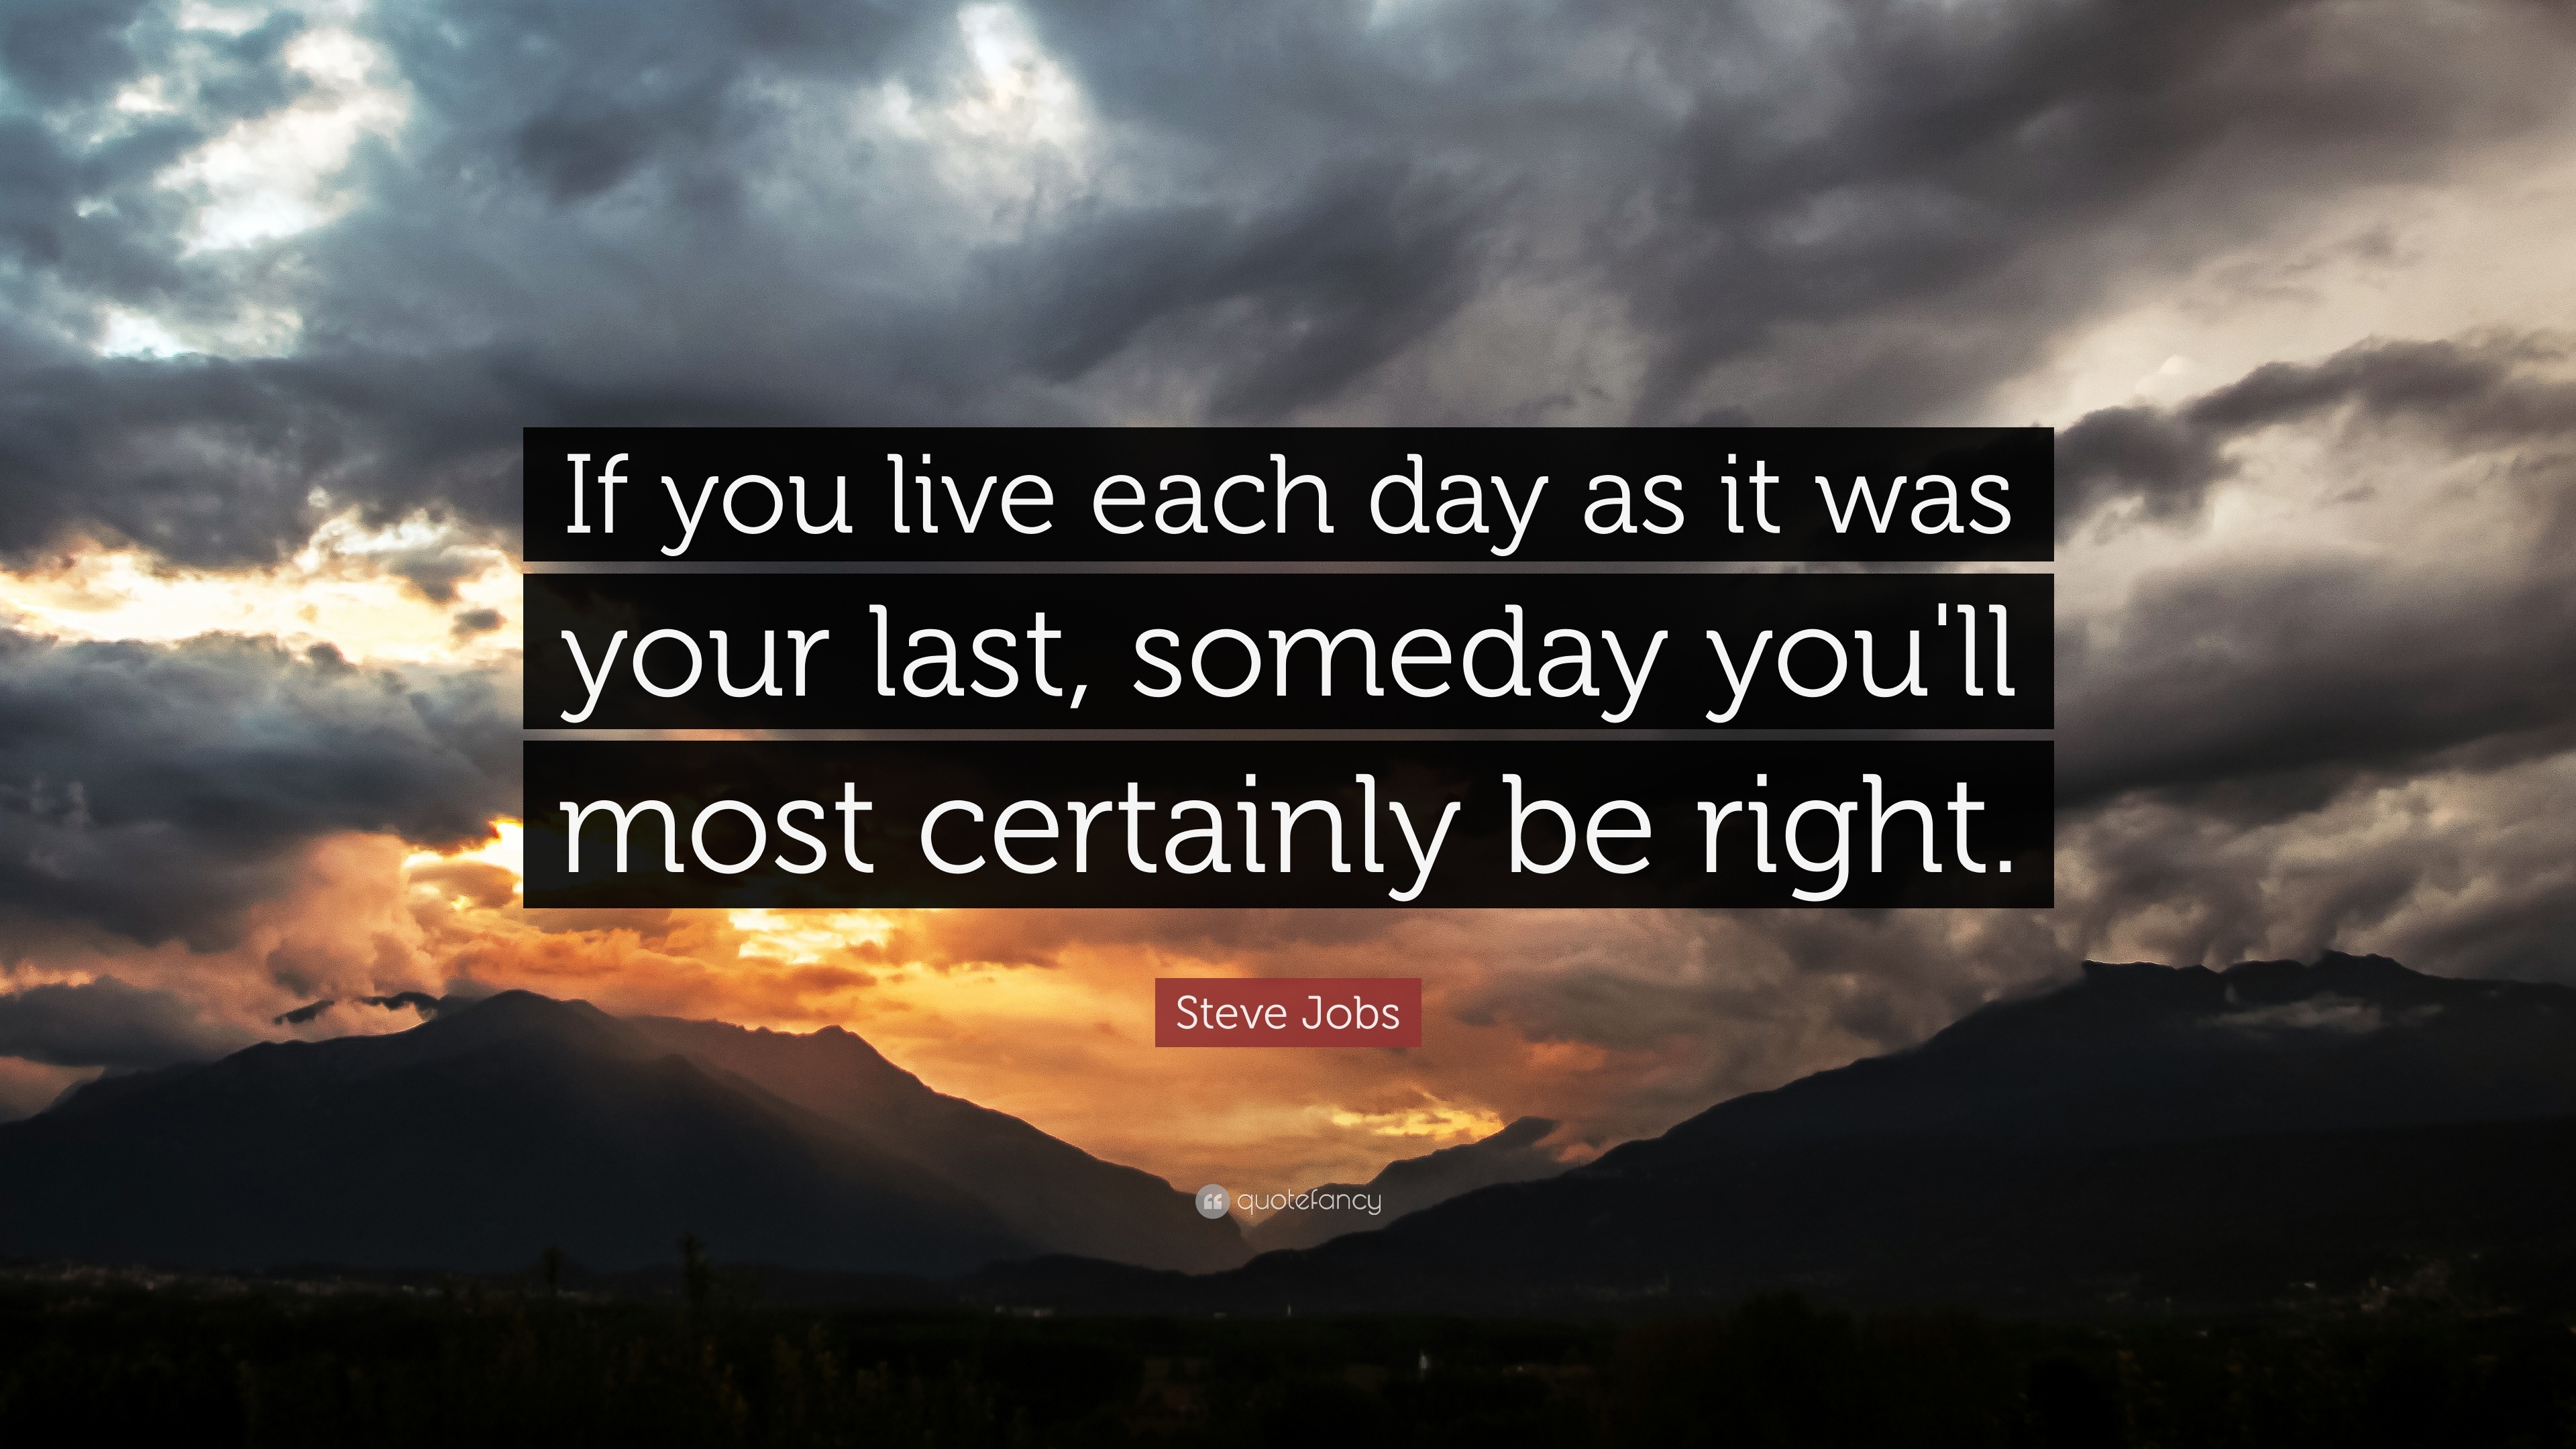 Steve Jobs Quote: “If you live each day as it was your last